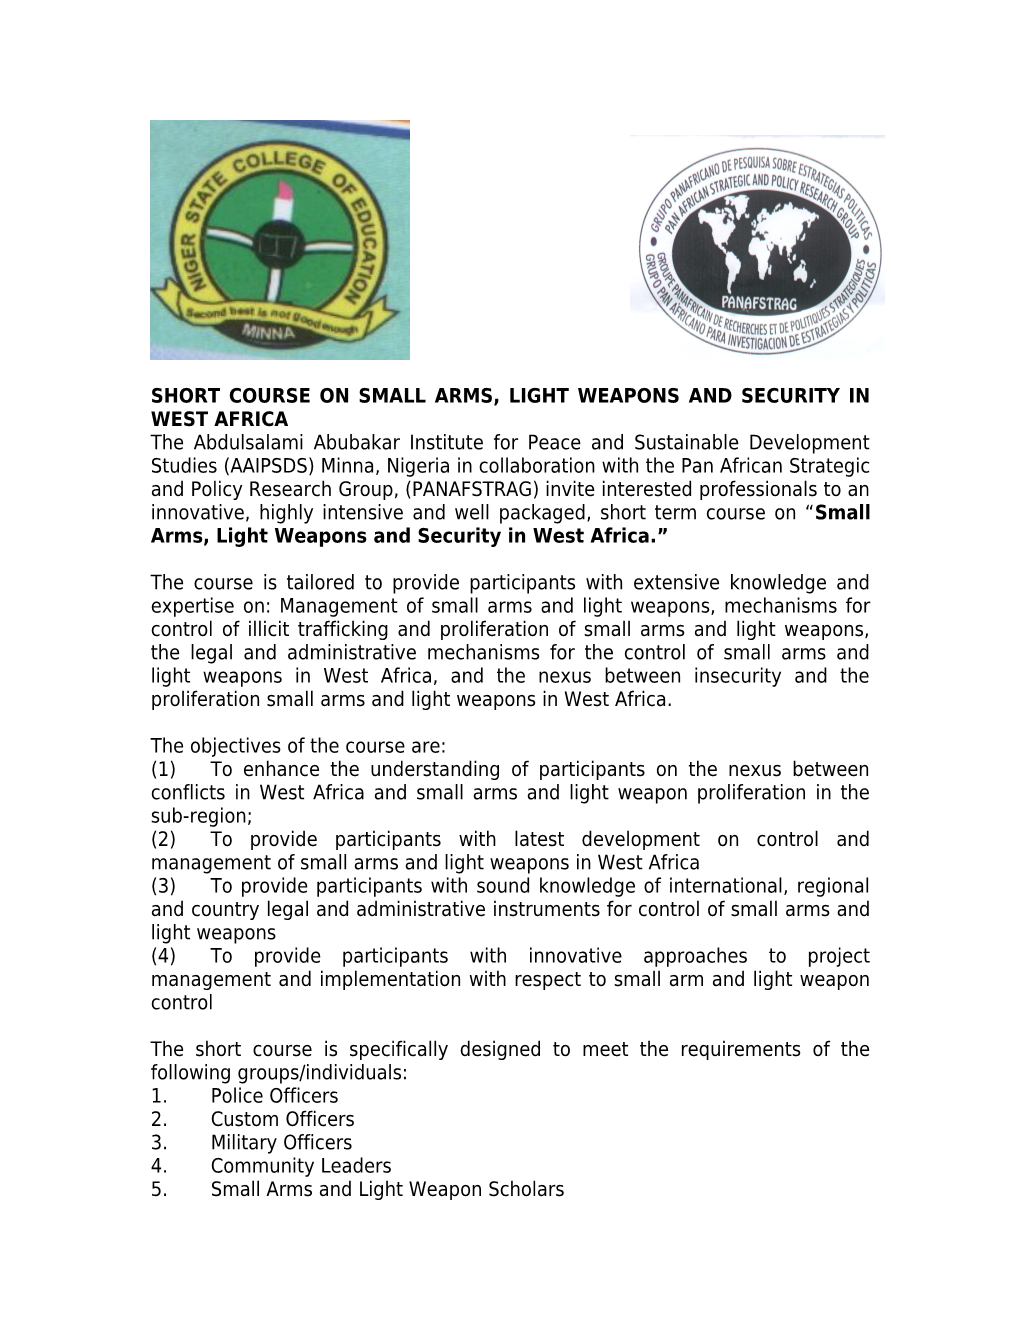 Short Course on Small Arms and Light Weapons in West Africa